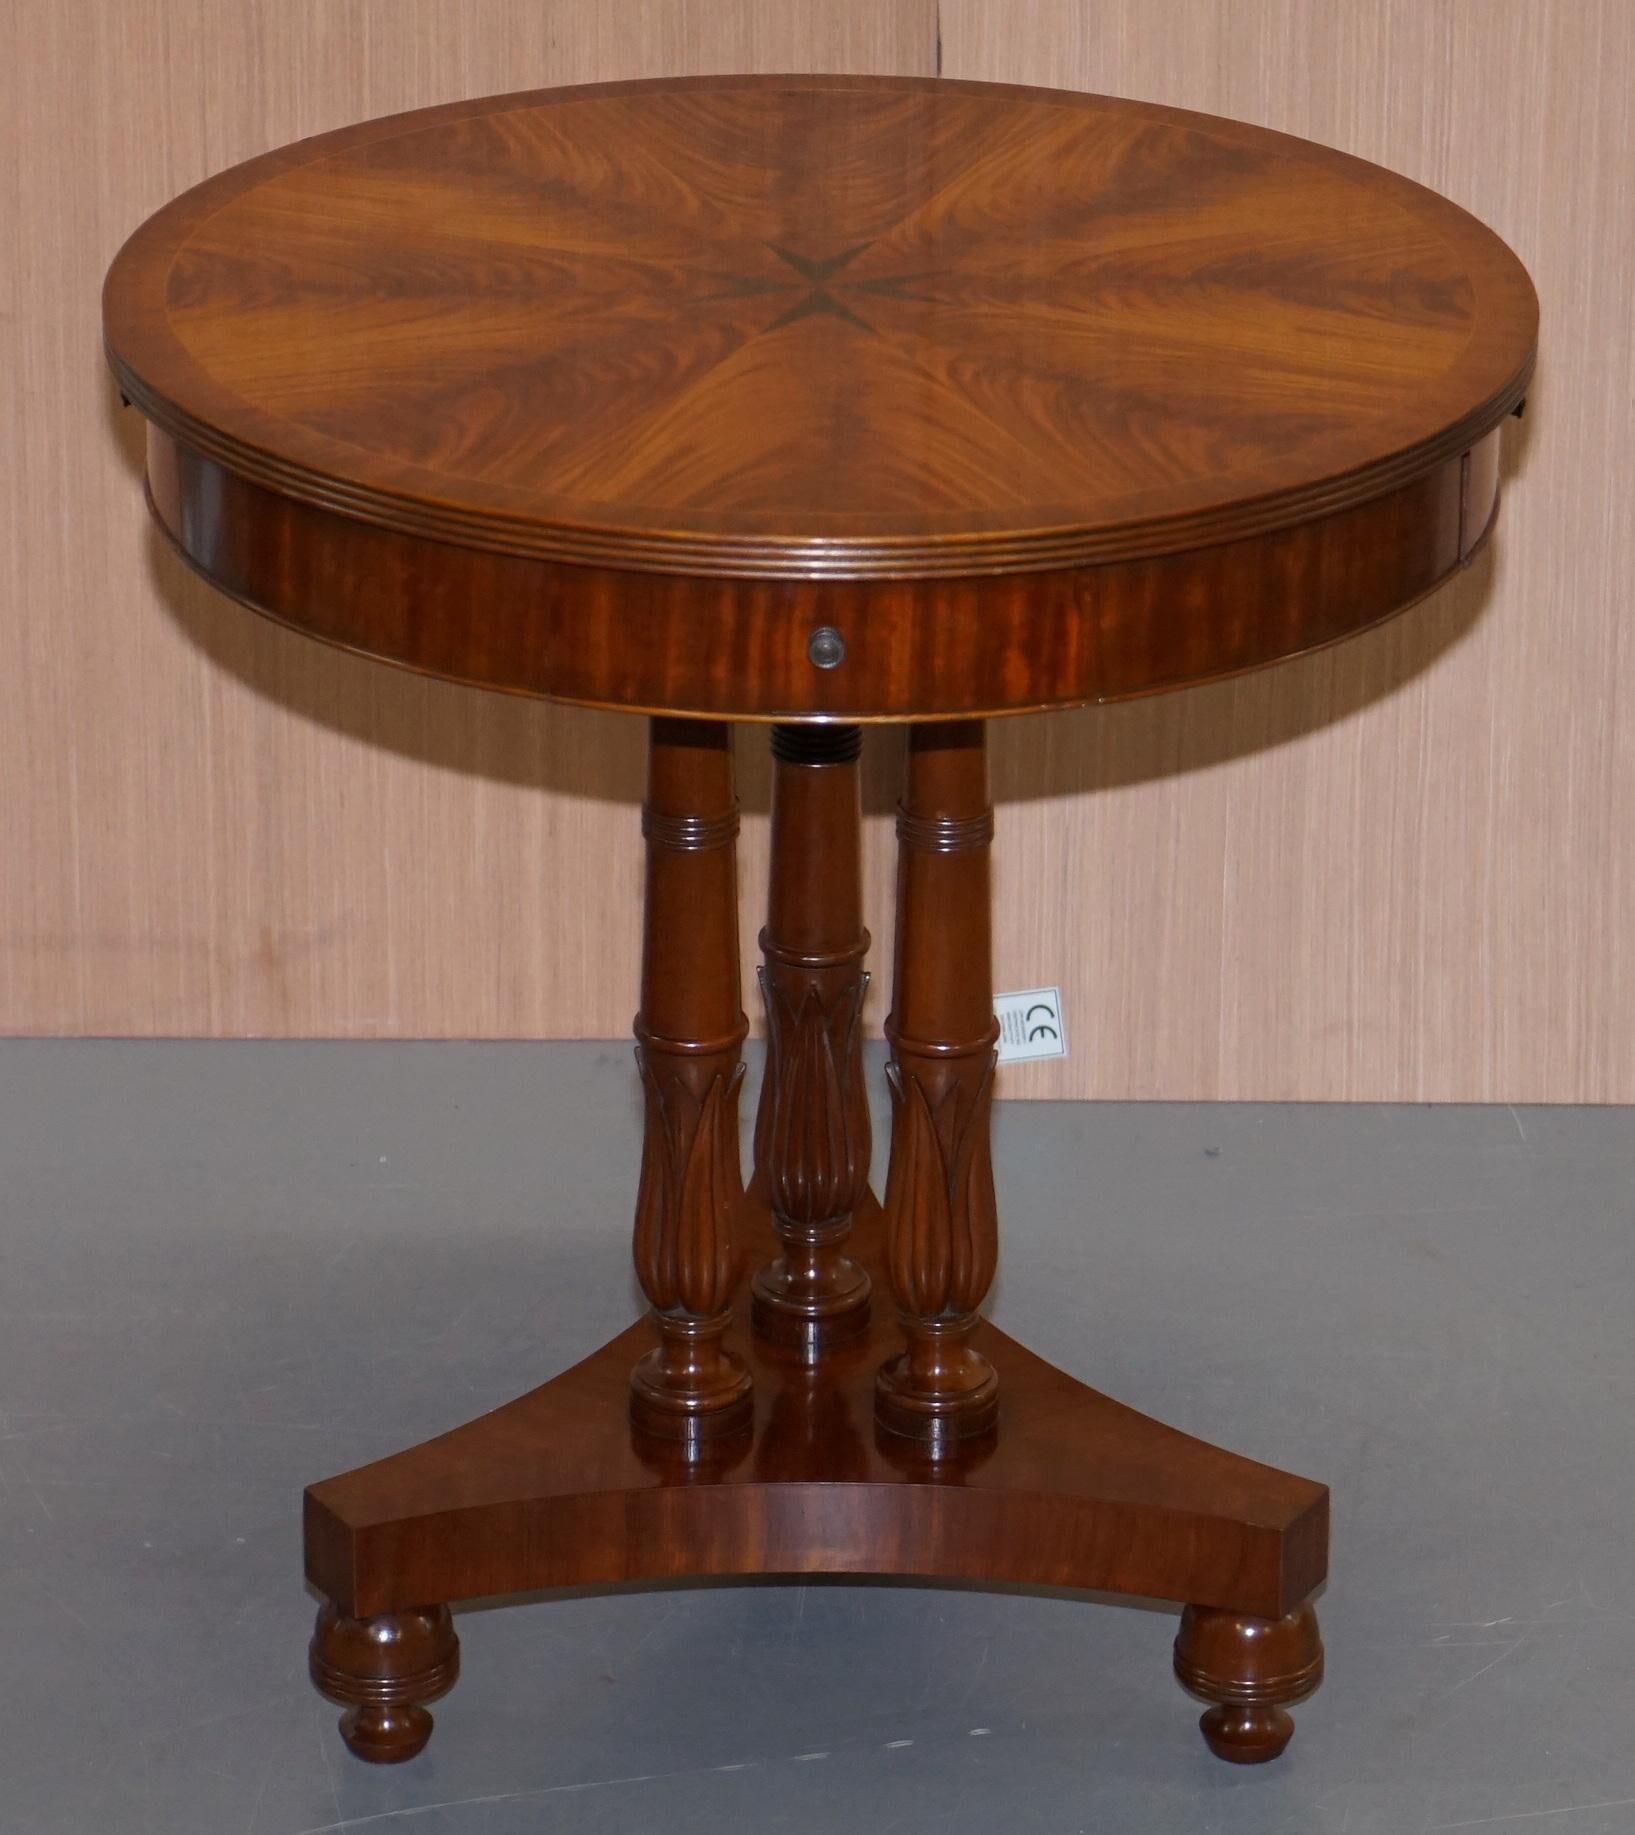 We are delighted to offer for sale this lovely pair of original E.G Hudson Regency drum style side tables with four drawers each

A very high end pair of well made tables which were handmade in England. These tables are of the finest quality using